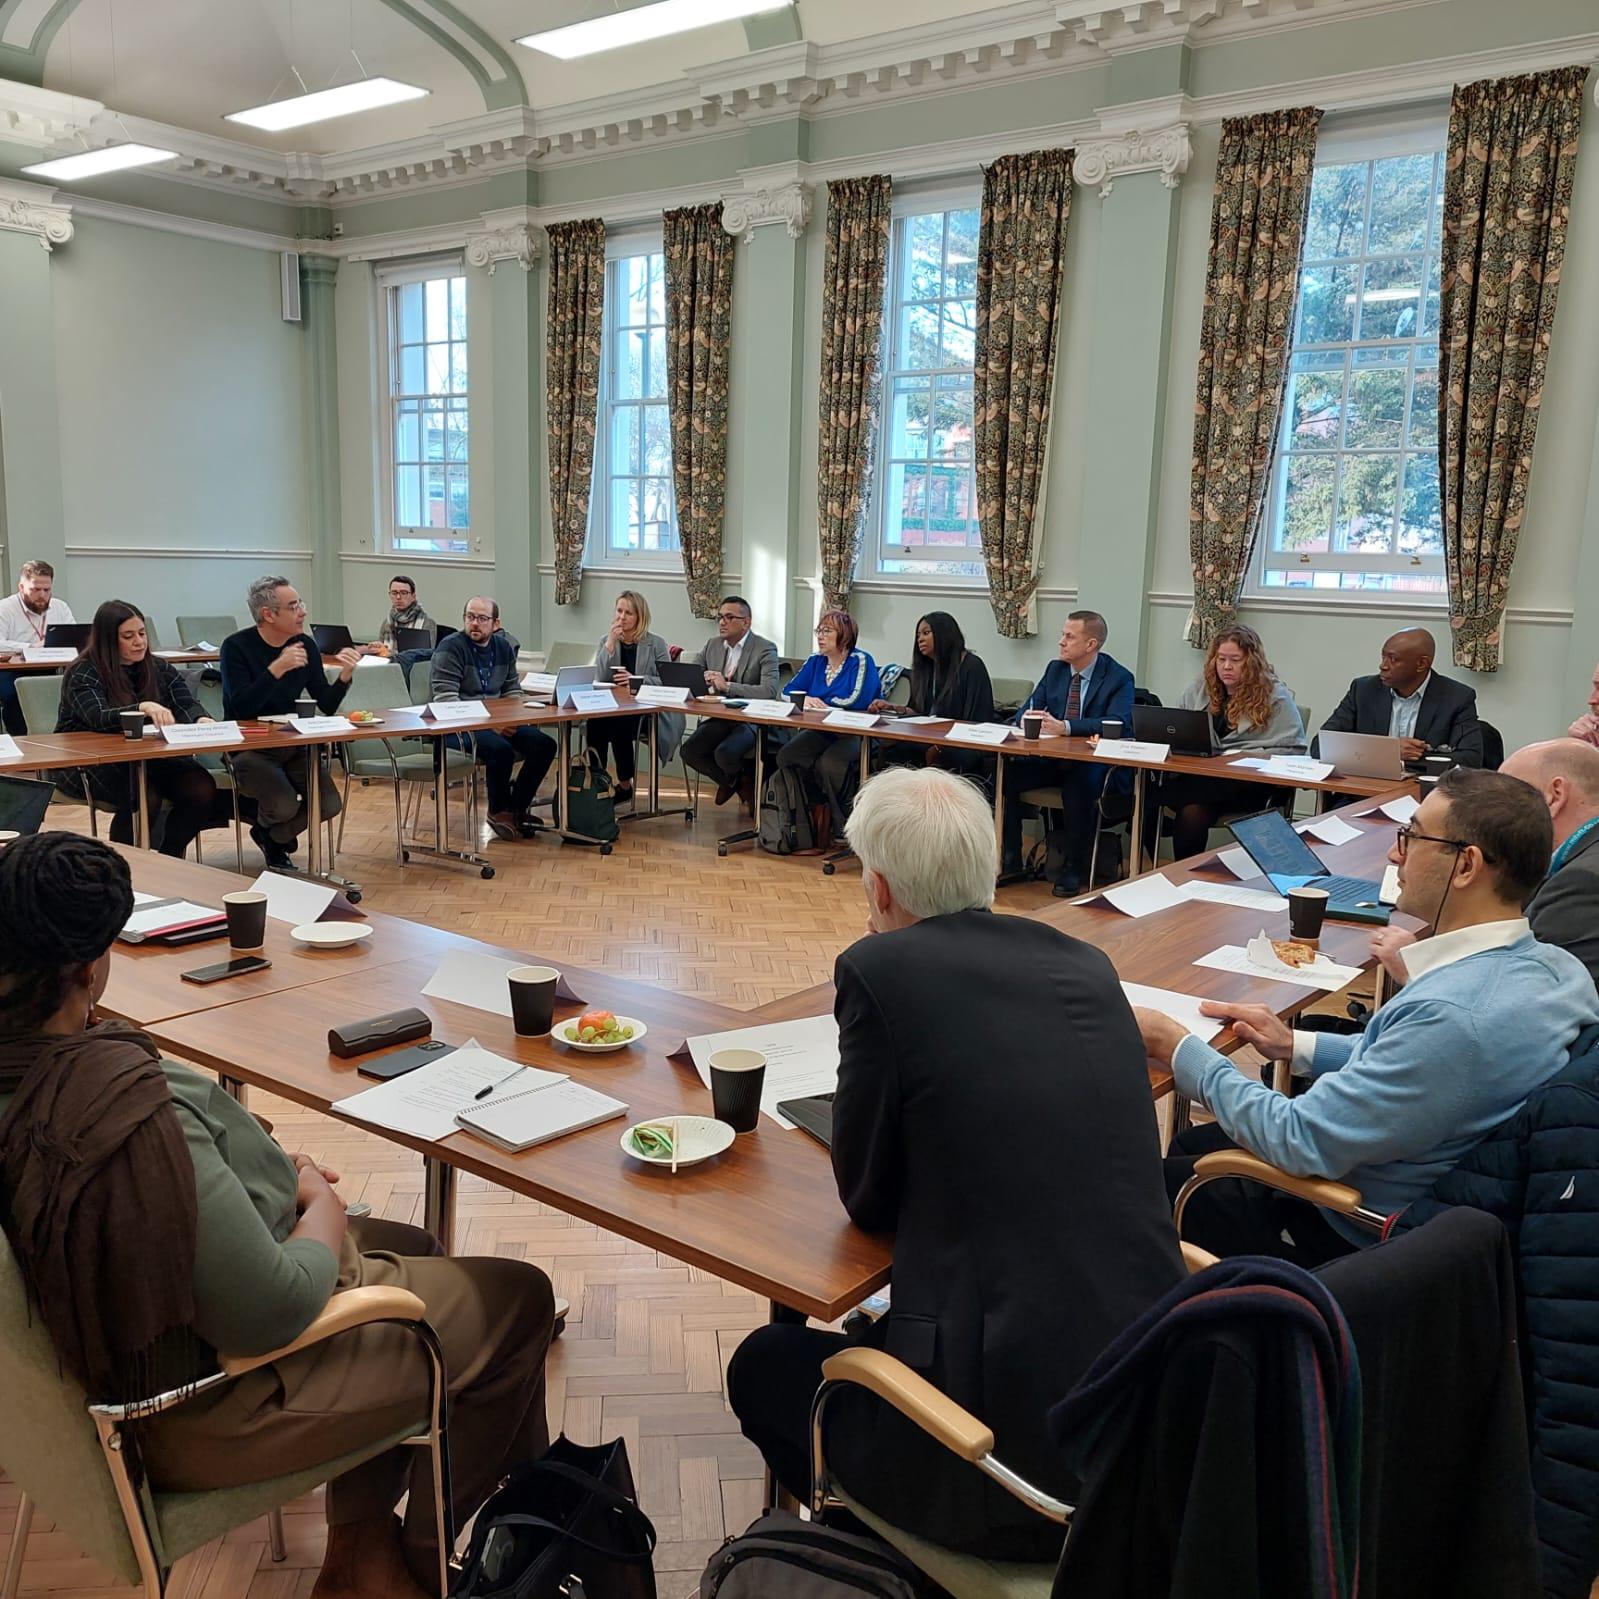 Council Leader, Cllr Peray Ahmet and Cabinet Lead, Cllr Dana Carlin met with Haringey’s registered housing providers to discuss how the council can work with them to provide high quality housing and services for tenants.